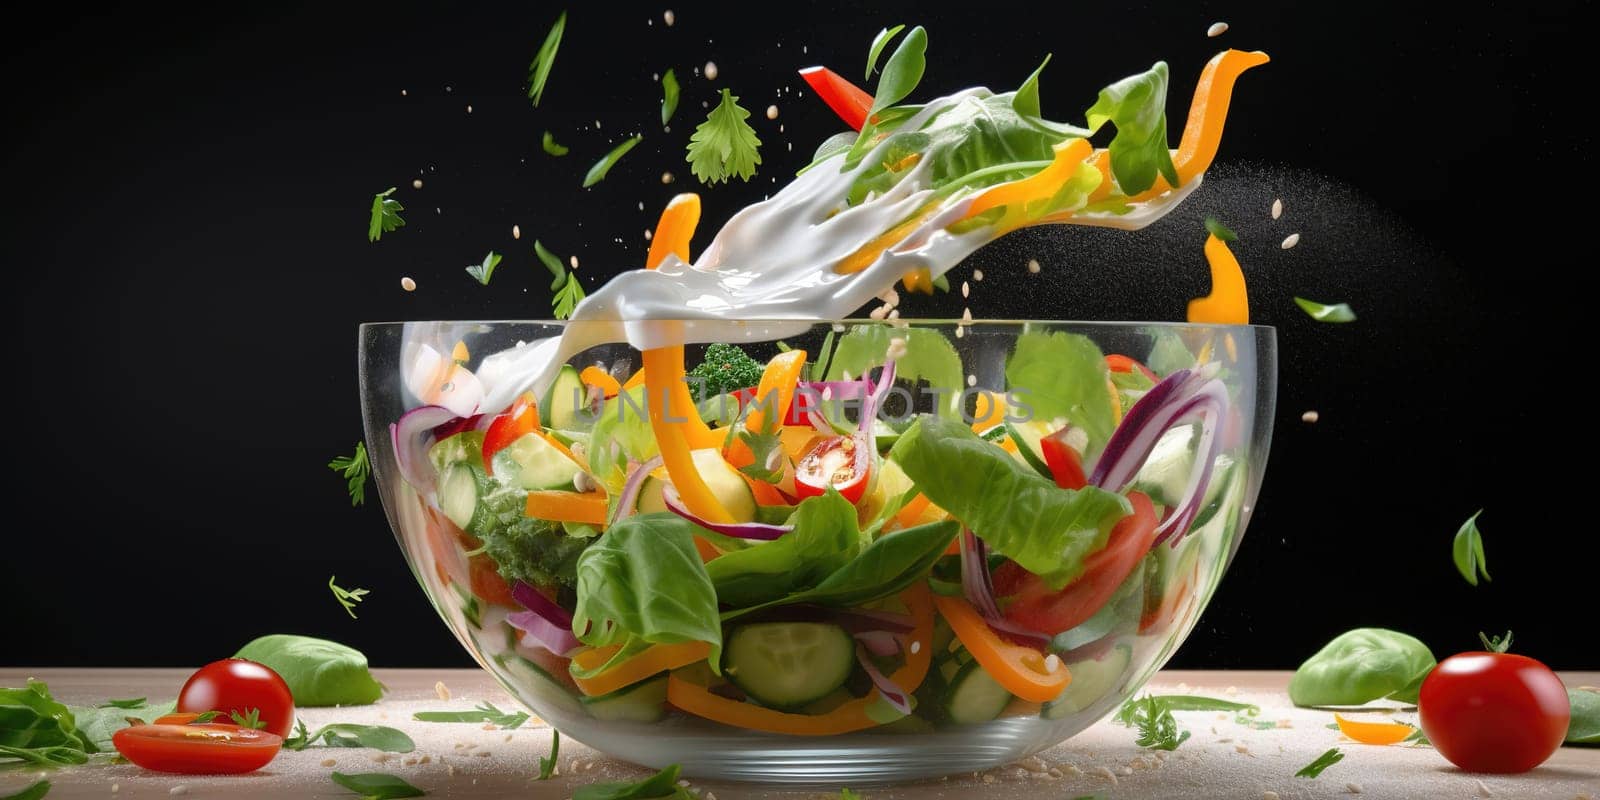 Salad falling into a glass bowl by GekaSkr